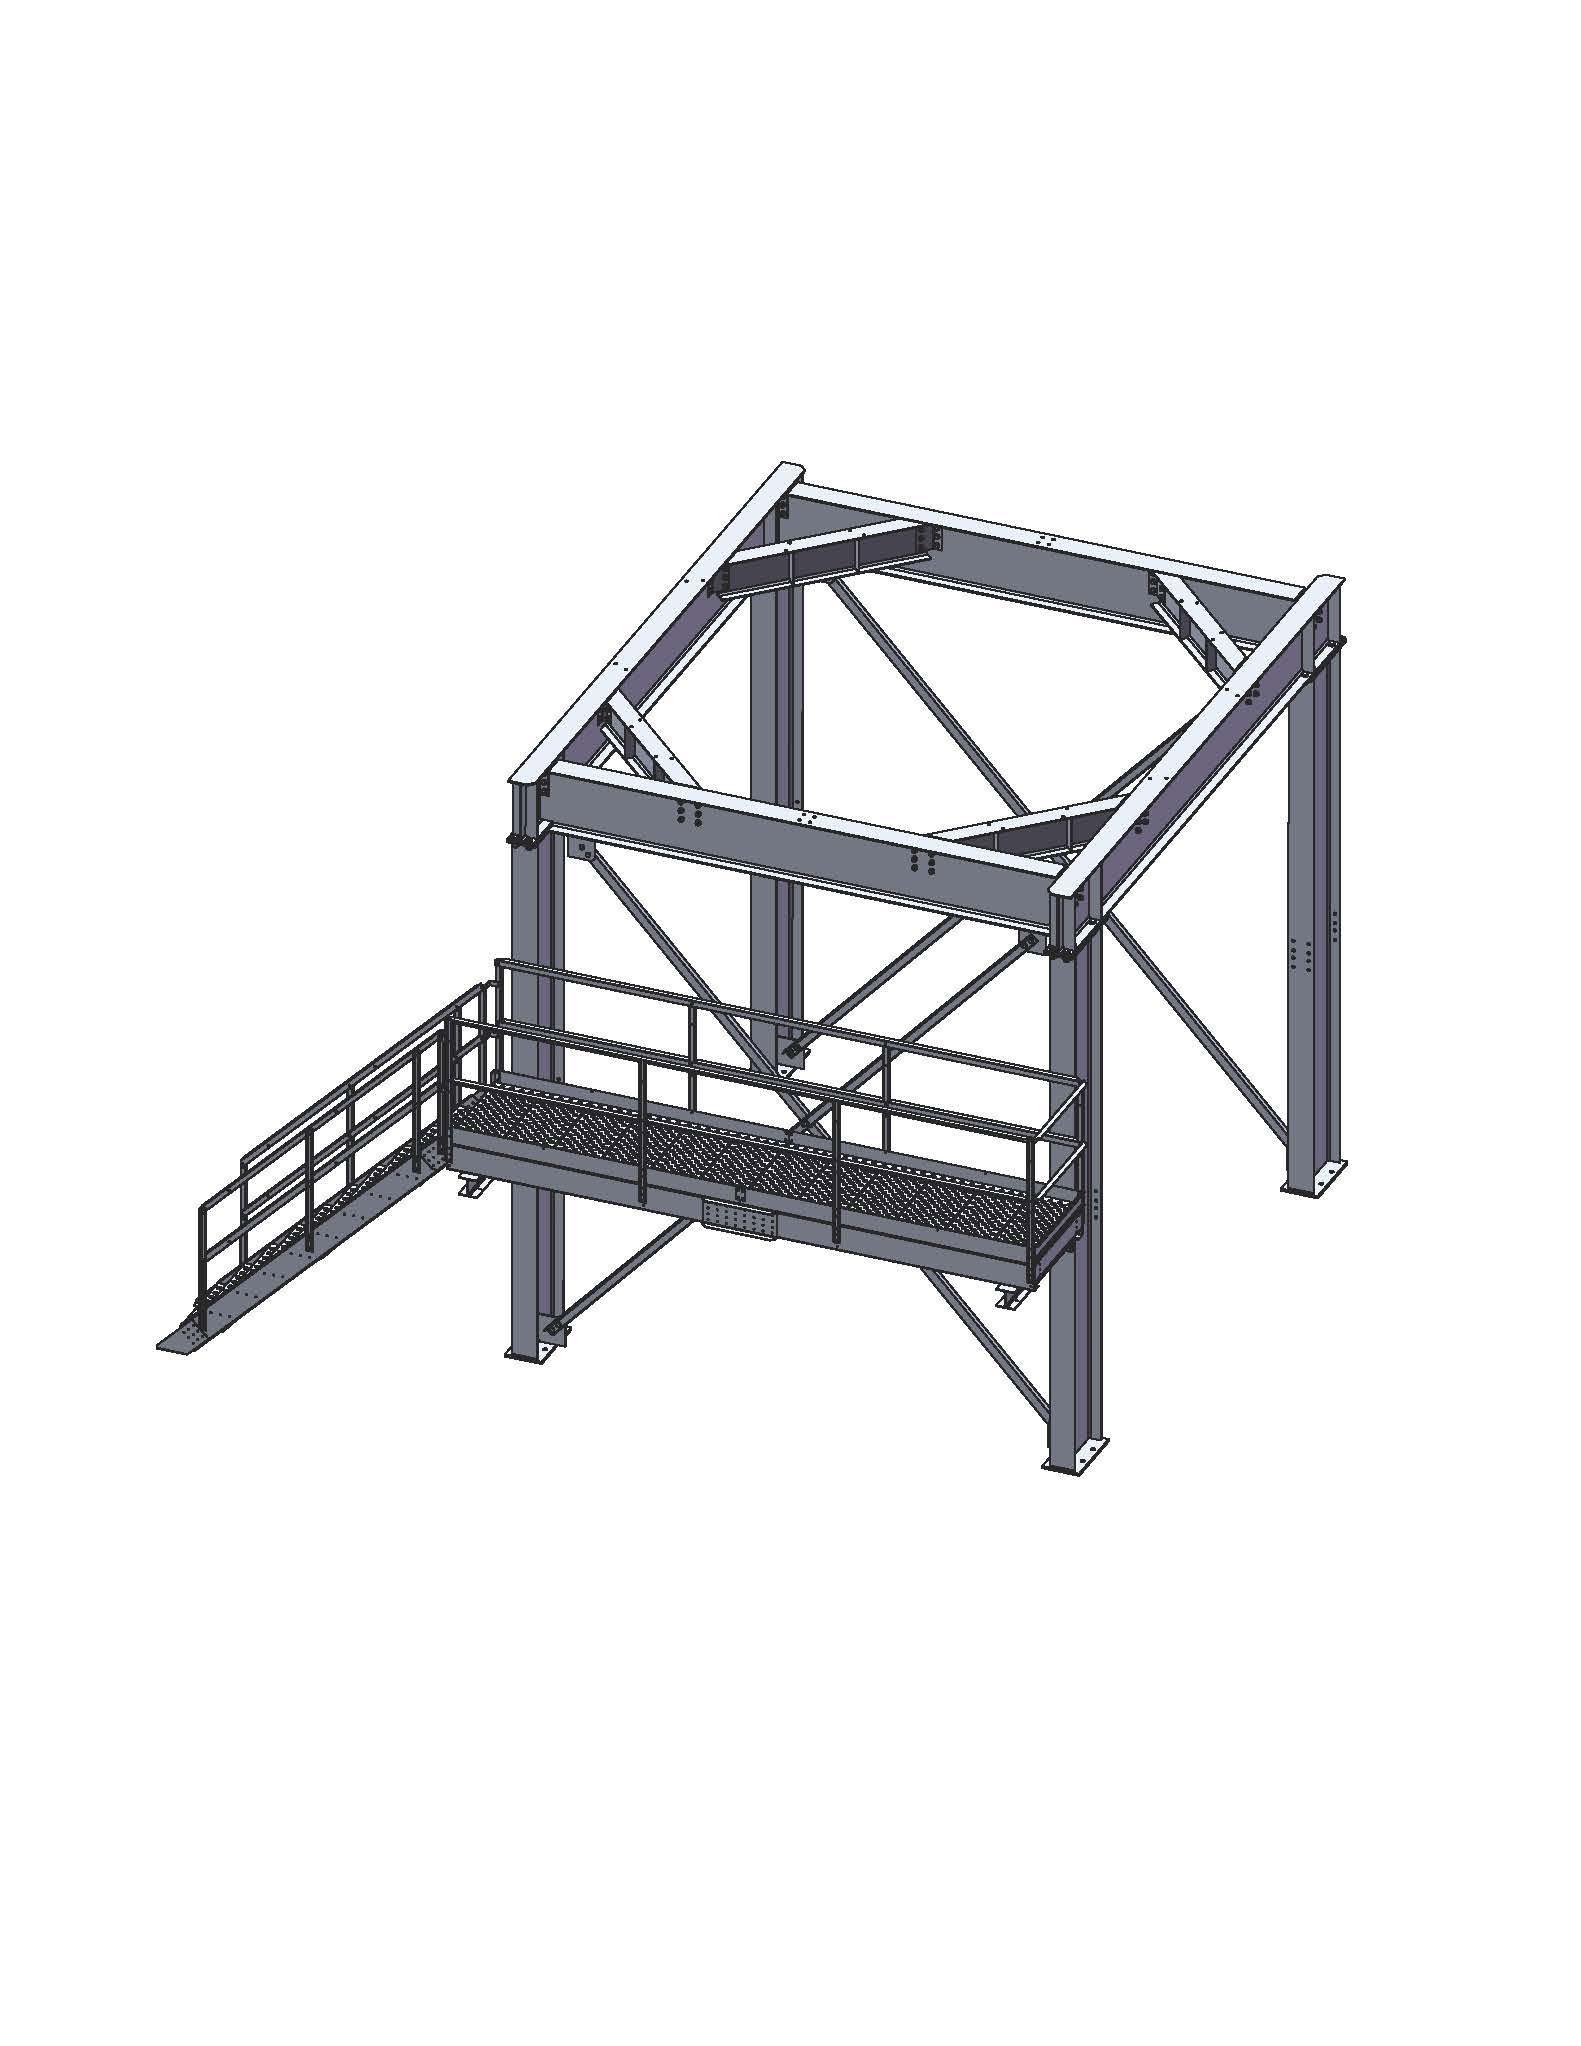 SUBSTRUCTURE WITH VIEWING PLATFORM ONLY